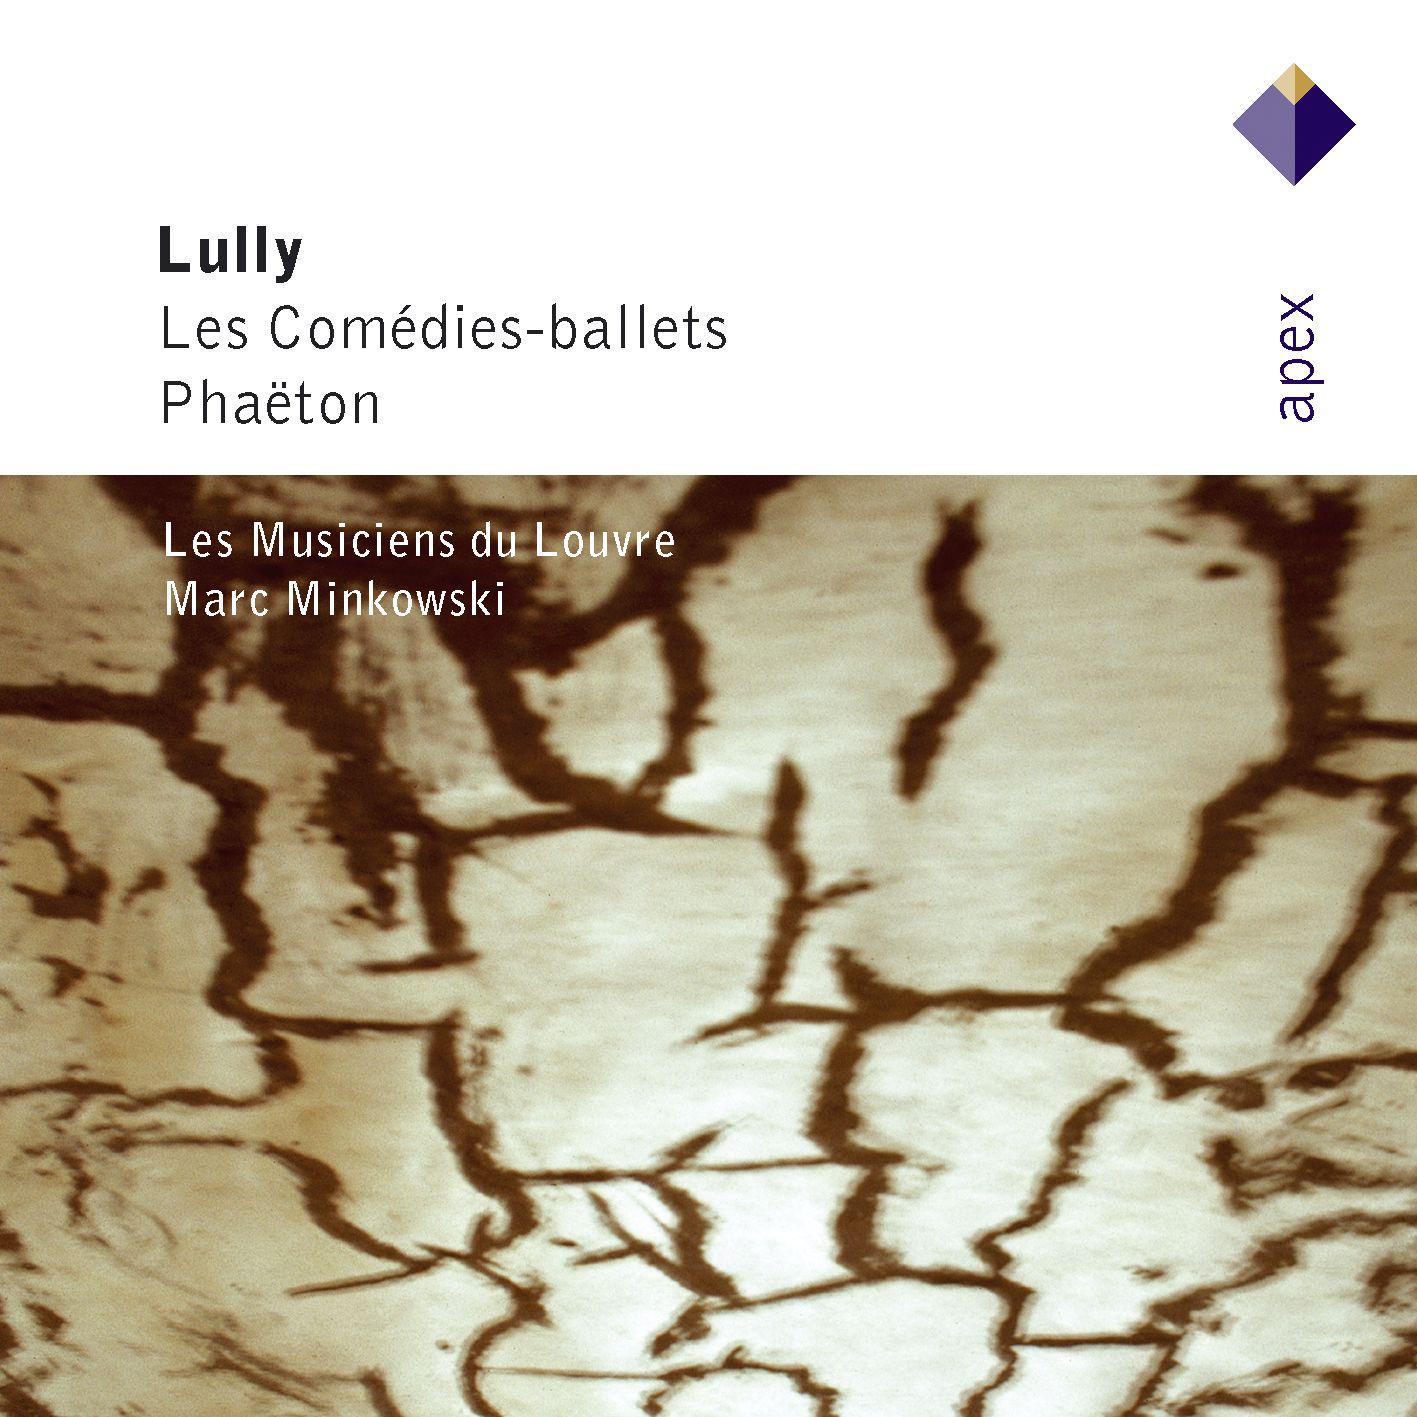 Lully : Les Come diesballets  Pha ton Highlights  Apex